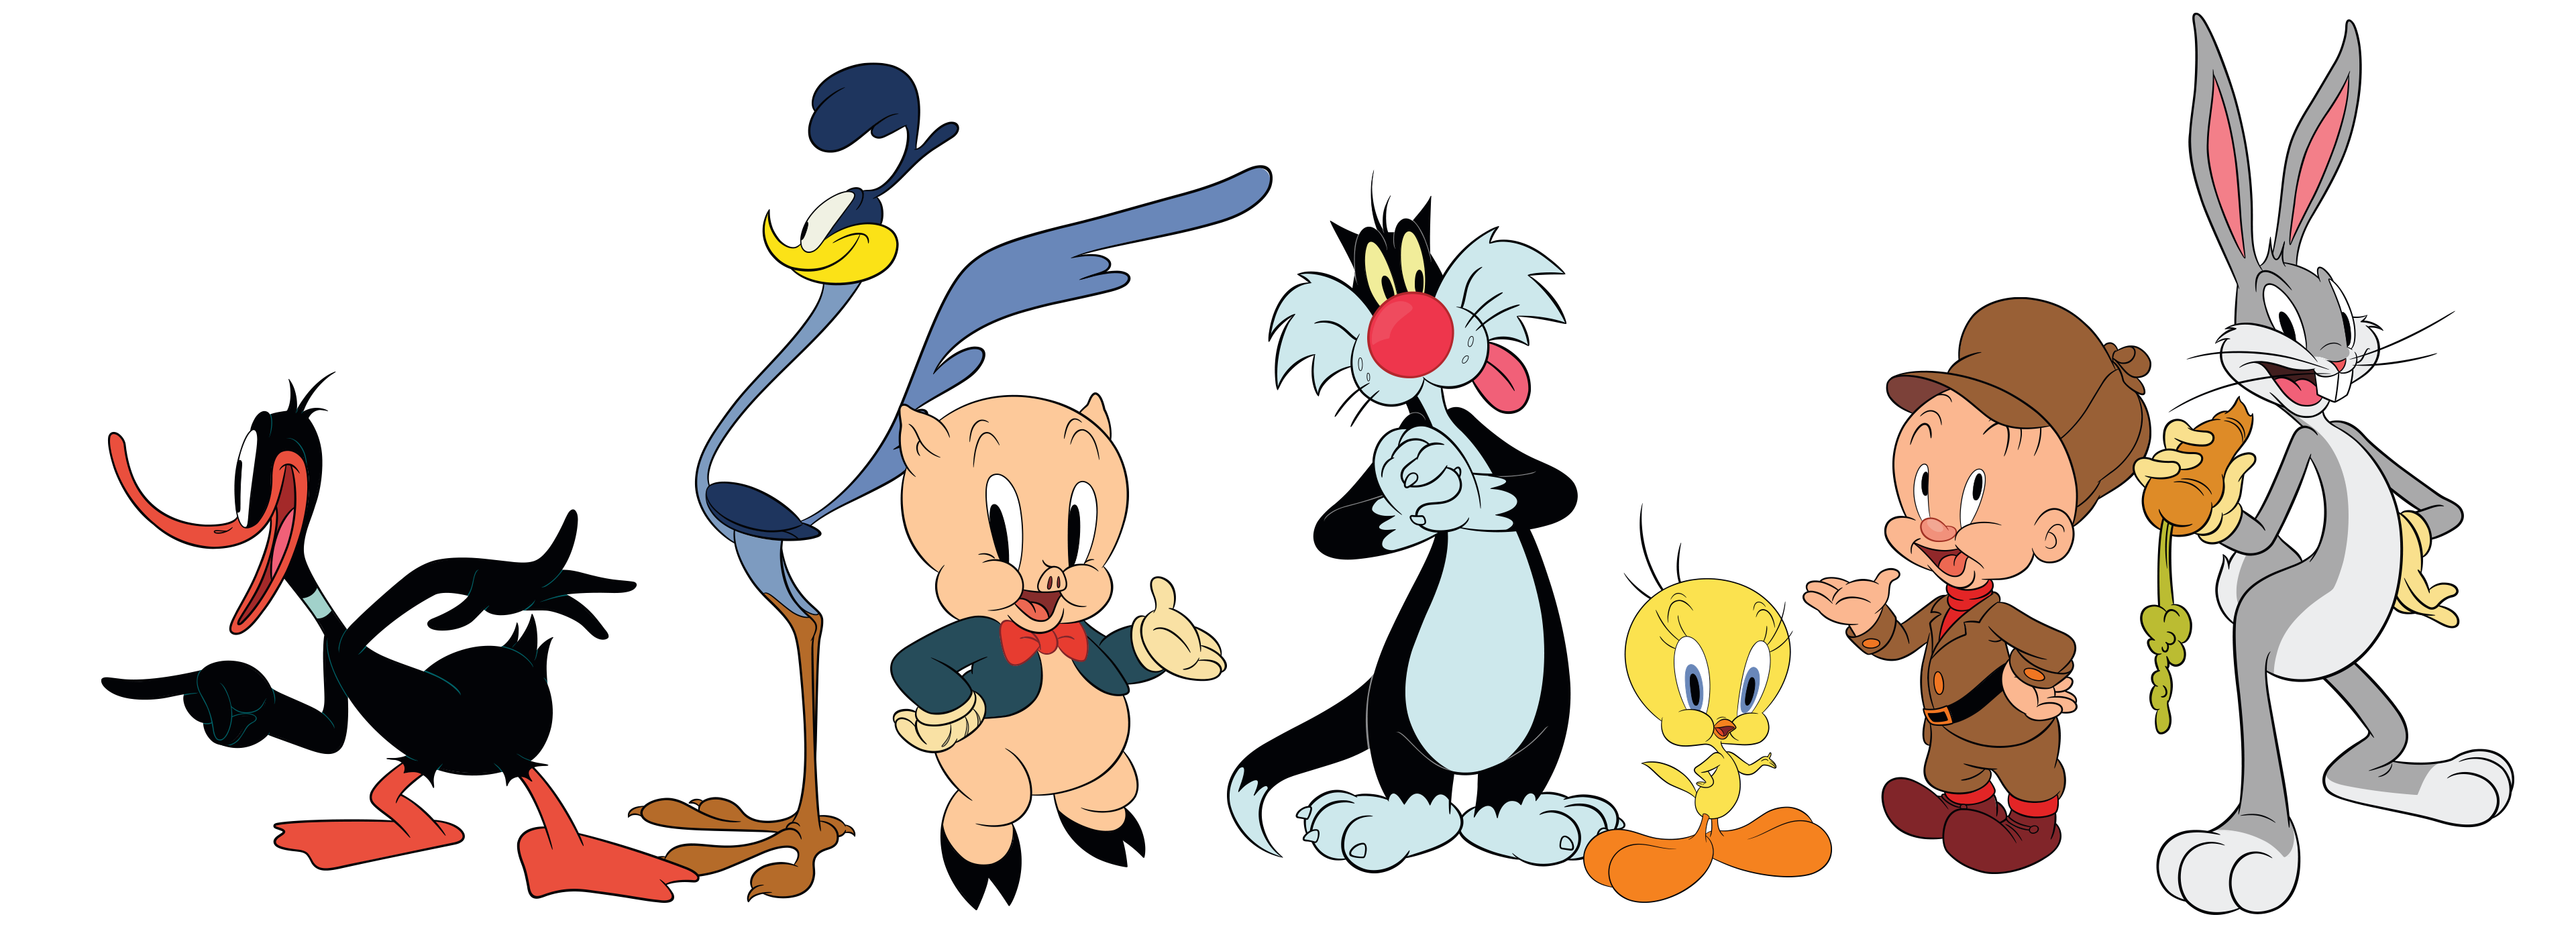 Looney Tunes Cartoons Games, Videos, and Downloads Cartoon Network